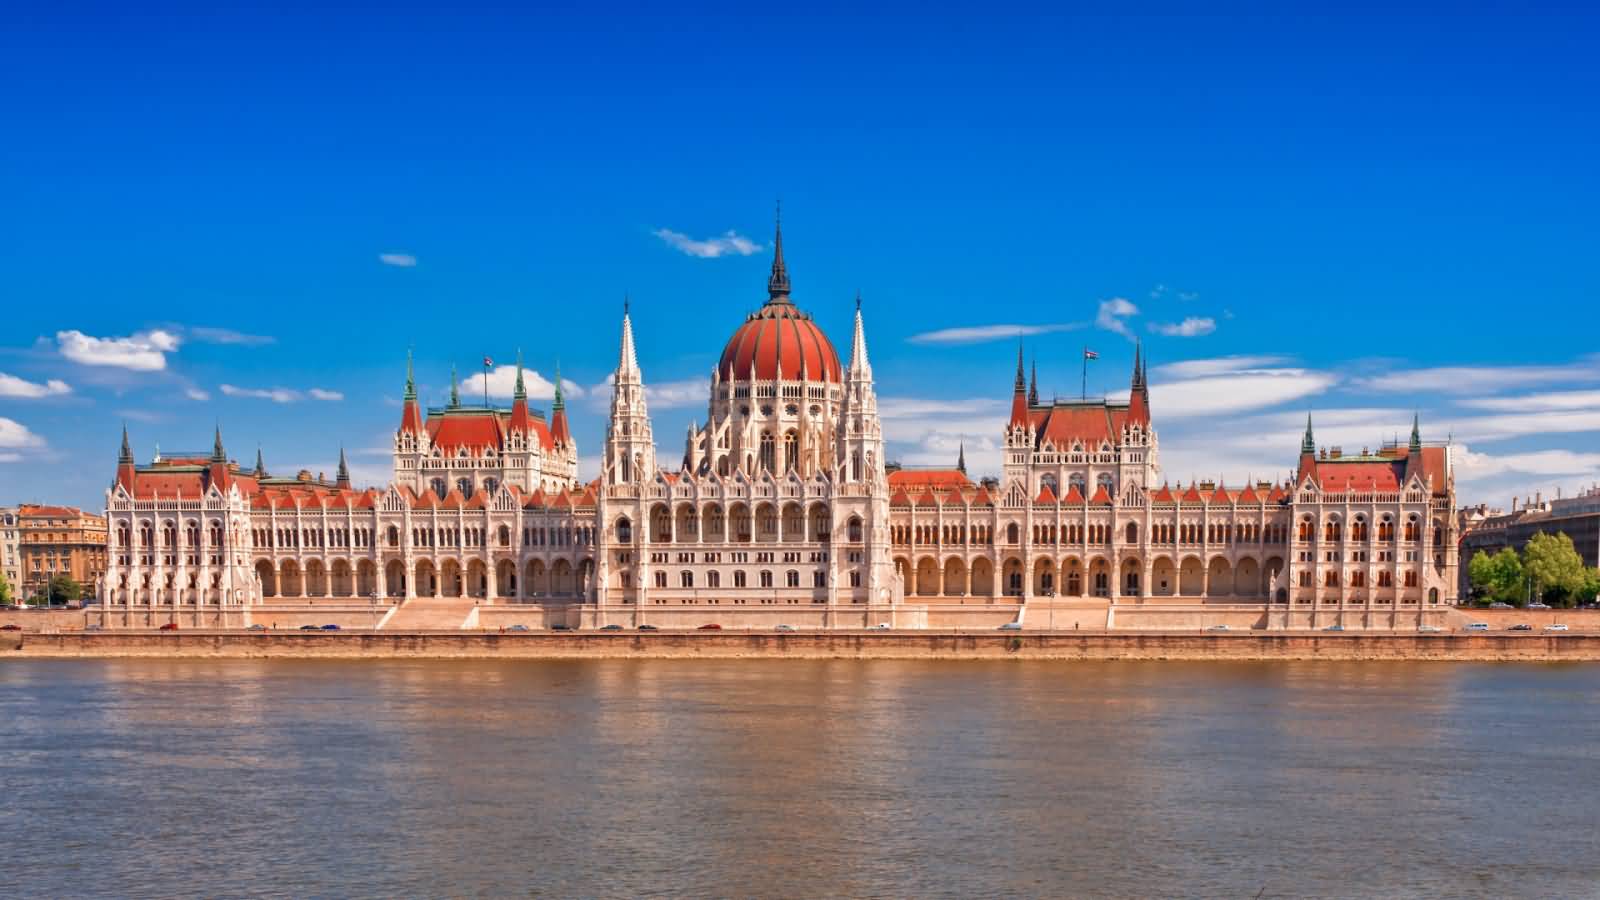 50 Incredible Pictures Of The Hungarian Parliament Building In Budapest